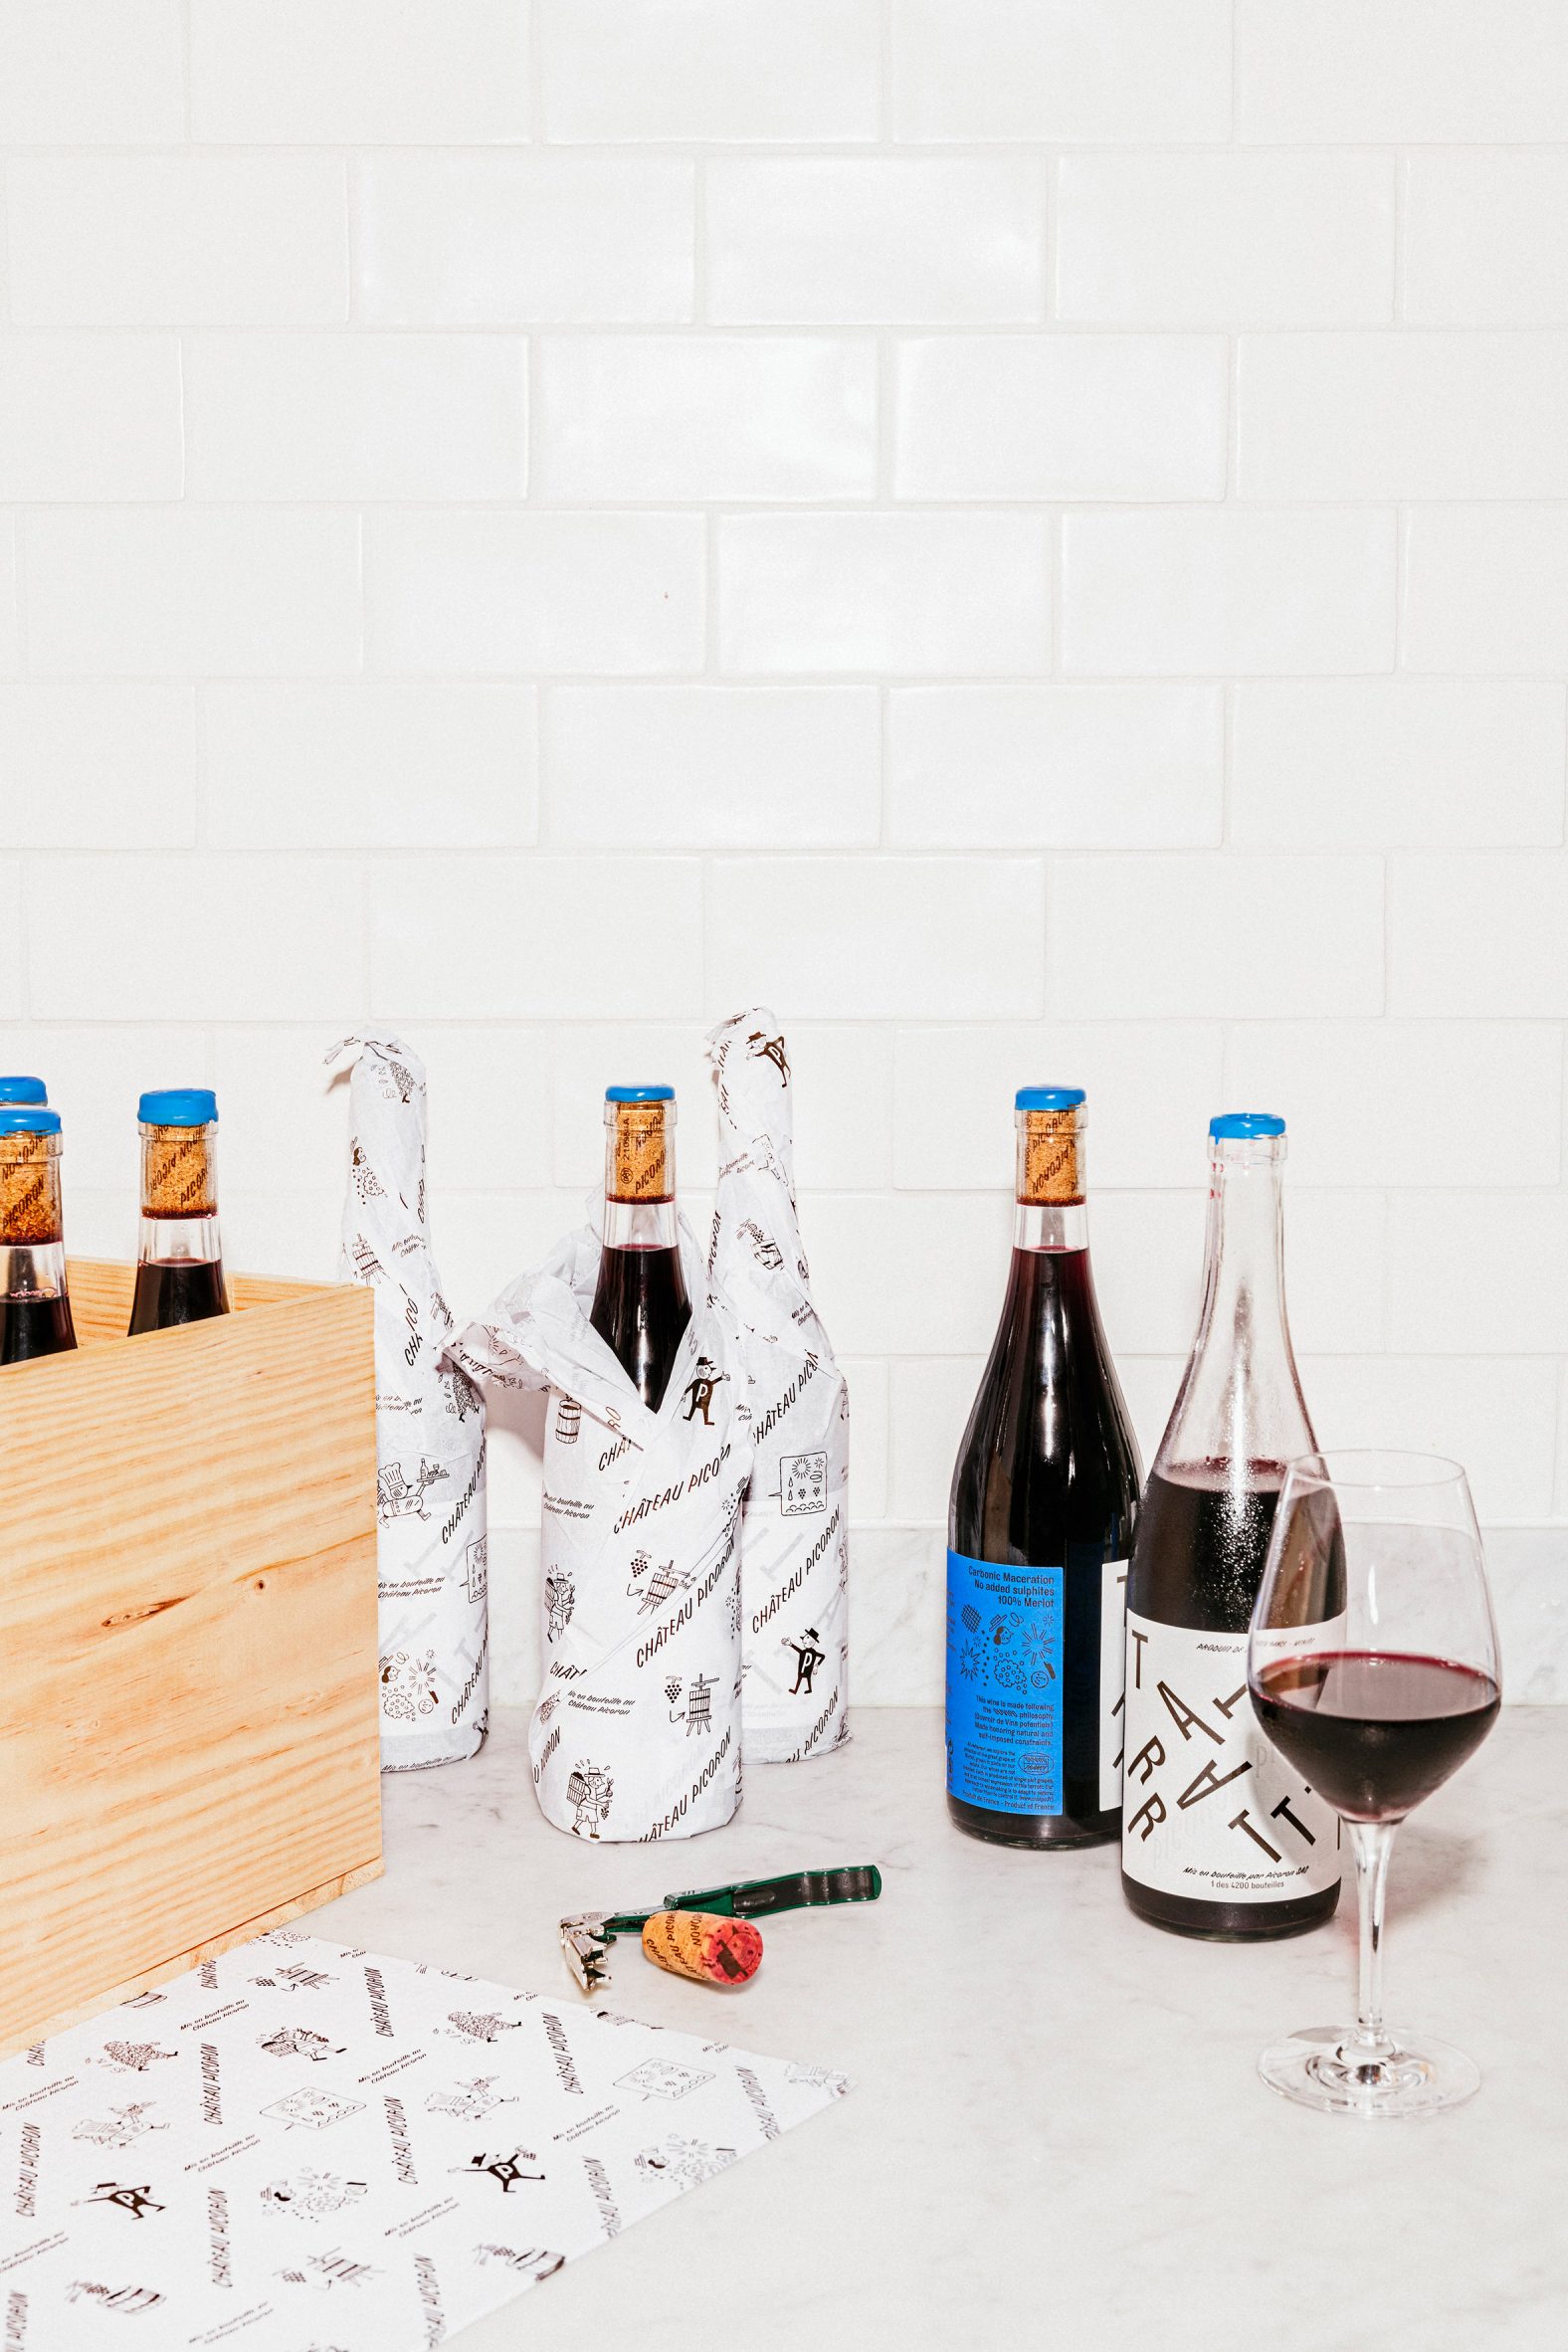 Photo of several bottles of red wine on a table, with some wrapped in branded paper and some in a crate